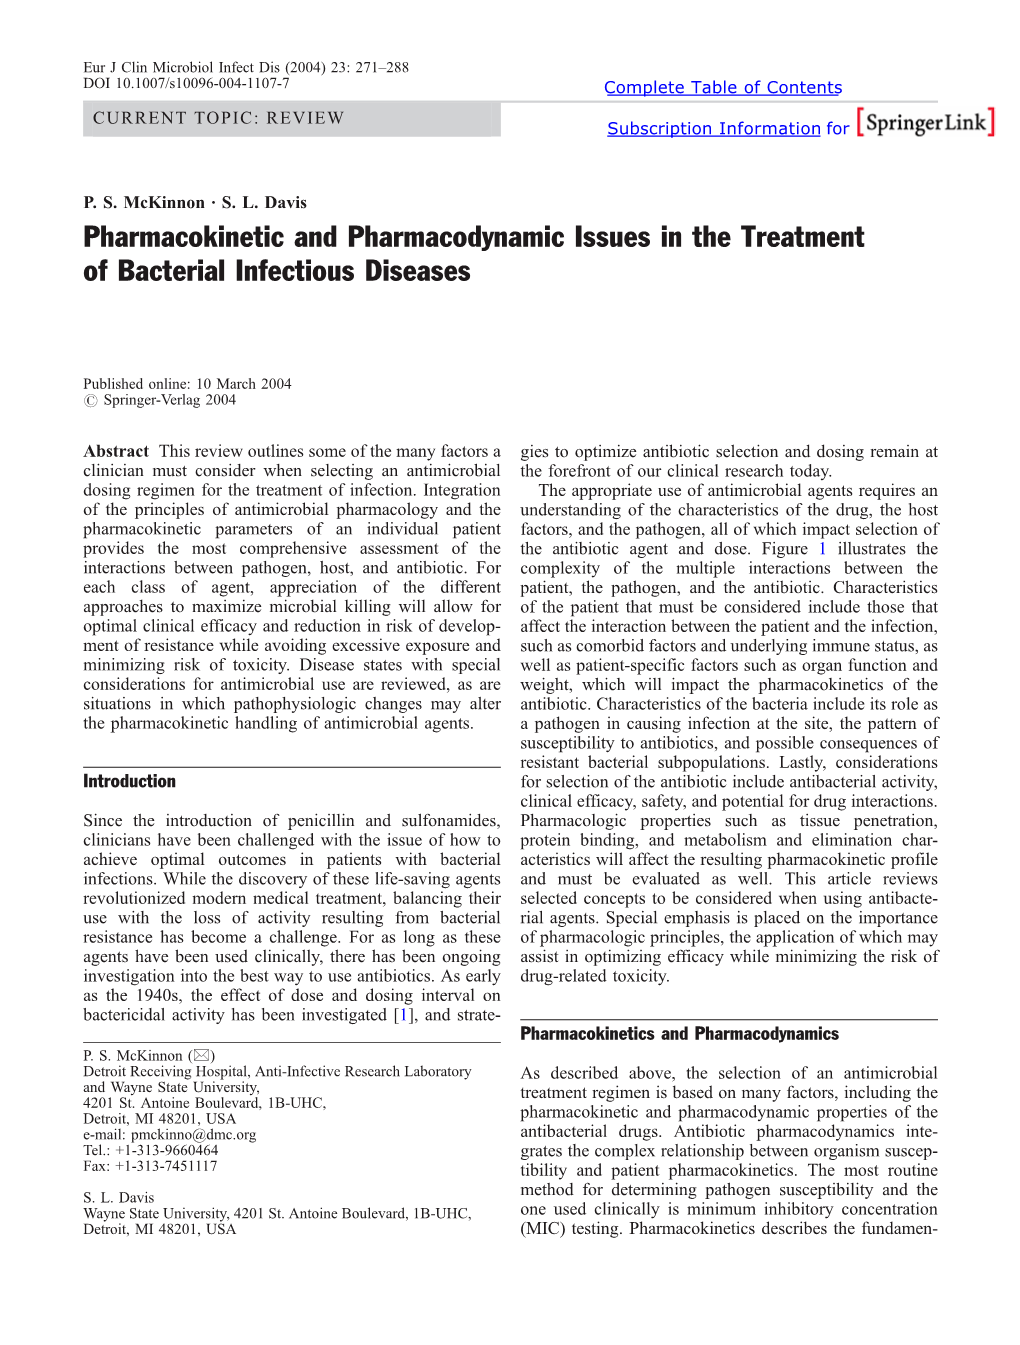 Pharmacokinetic and Pharmacodynamic Issues in the Treatment of Bacterial Infectious Diseases